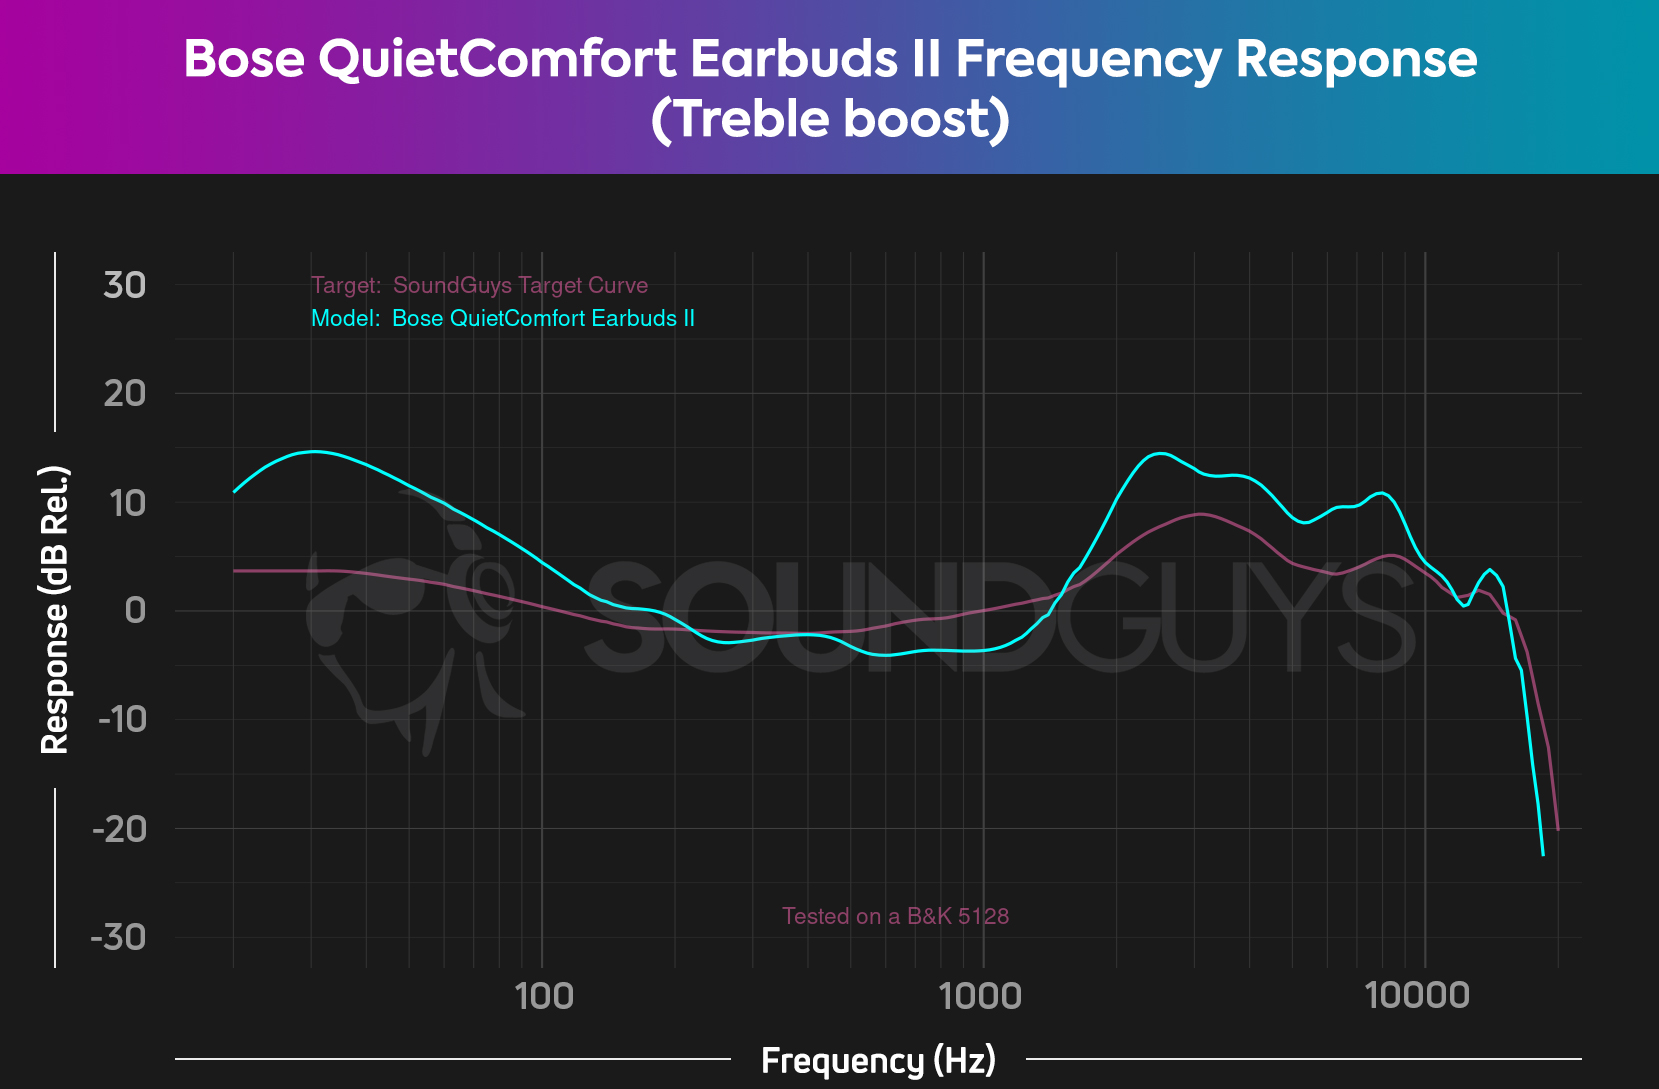 The treble boost preset of the Bose QuietComfort Earbuds II increases the treble emphasis in the highs.